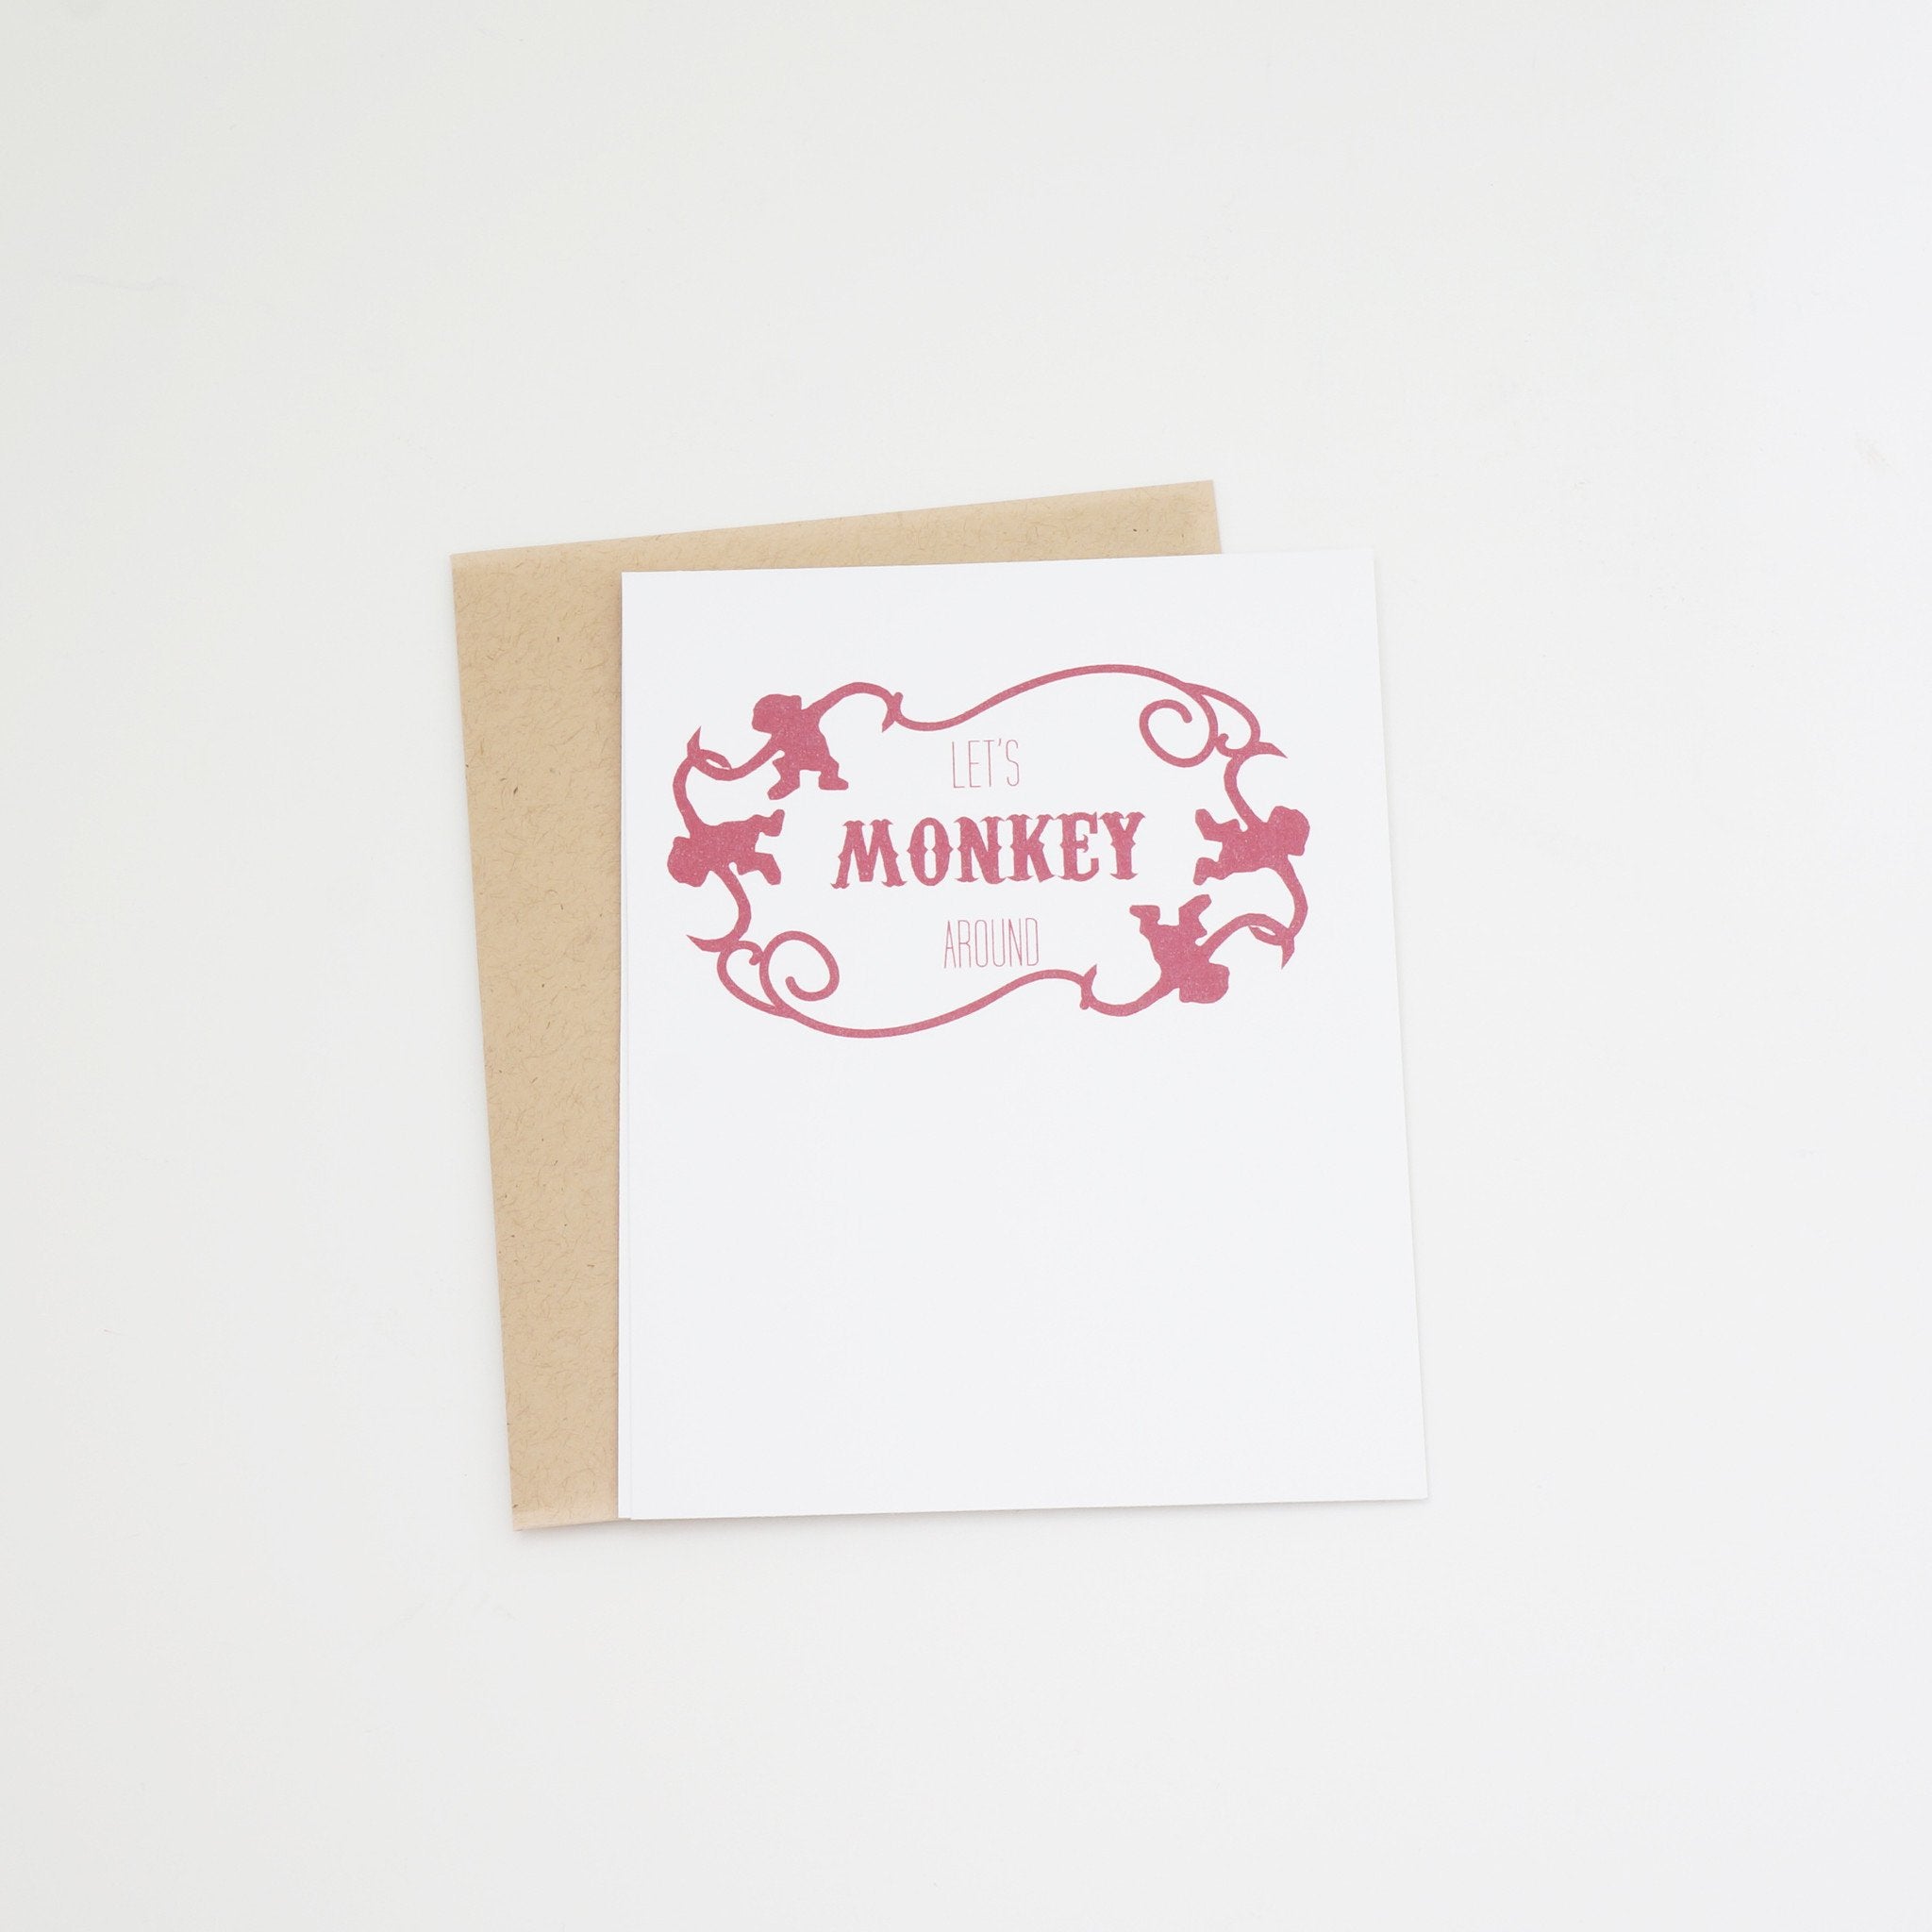 Let's Monkey Around Romantic Valentine's Day Card - shop greeting cards, handmade stationery, & wedding invitations by dodeline design